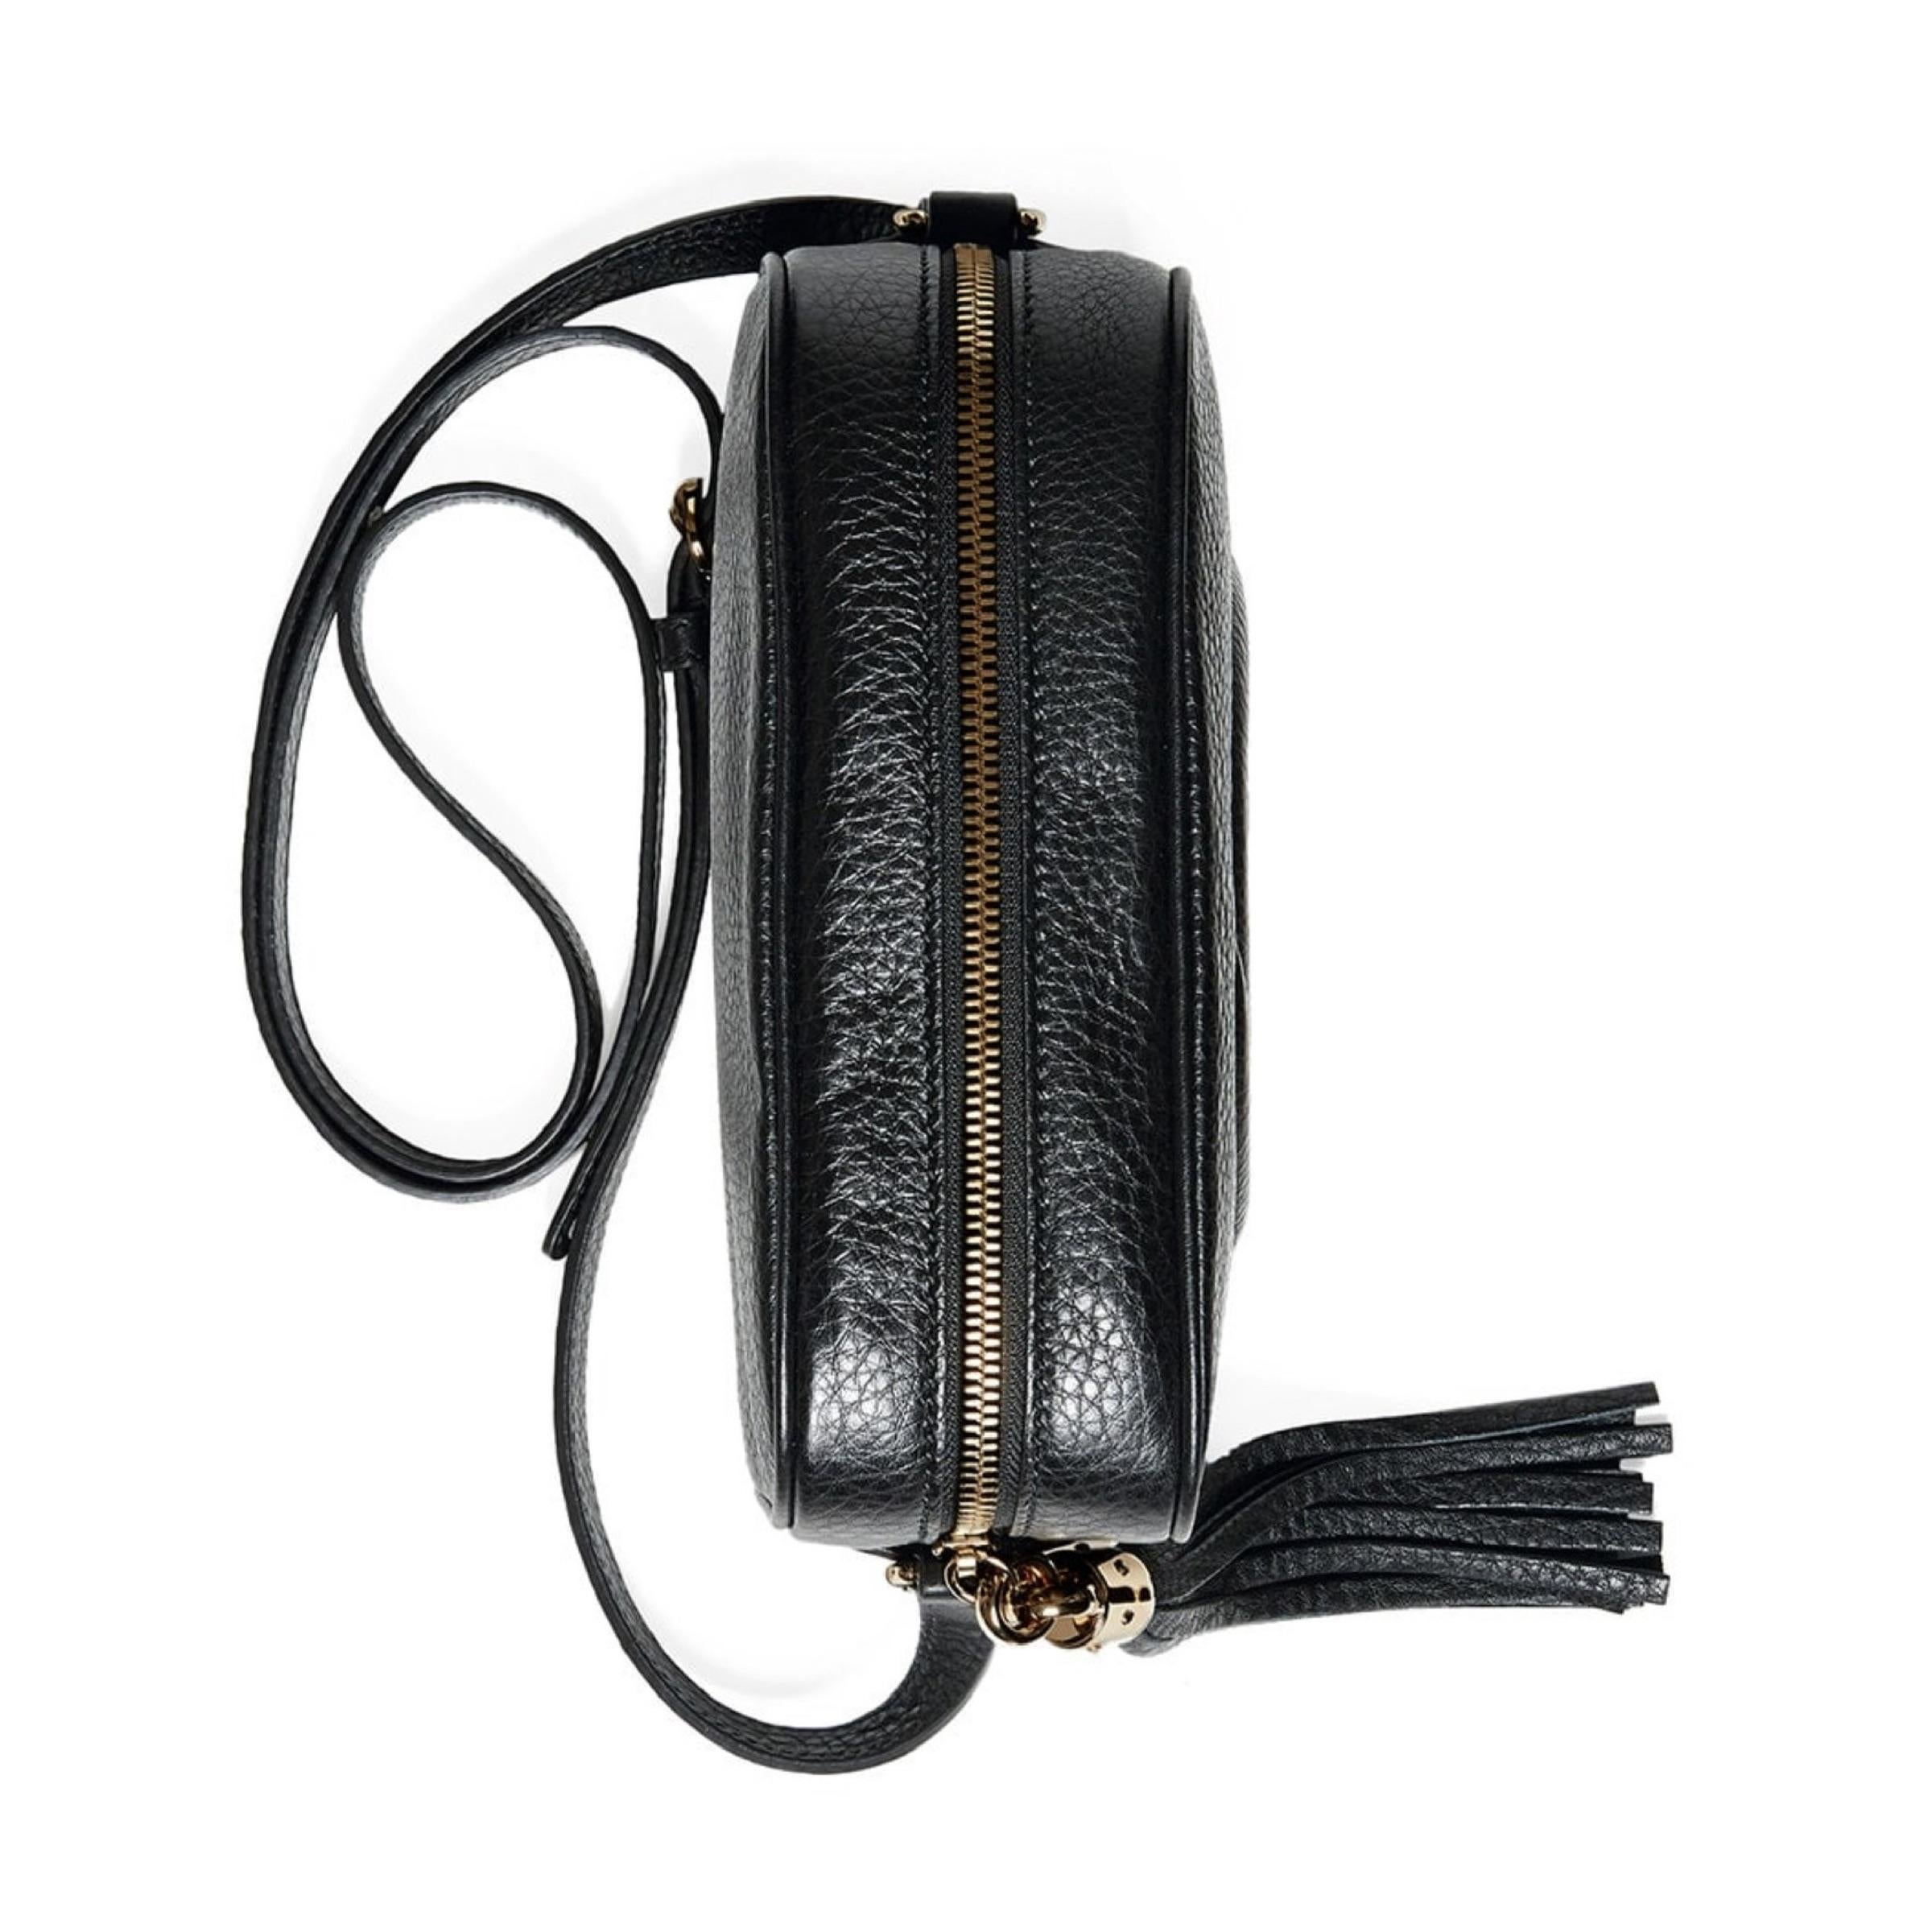 NEW Gucci Black Small Soho Disco Leather Crossbody Bag For Sale 1